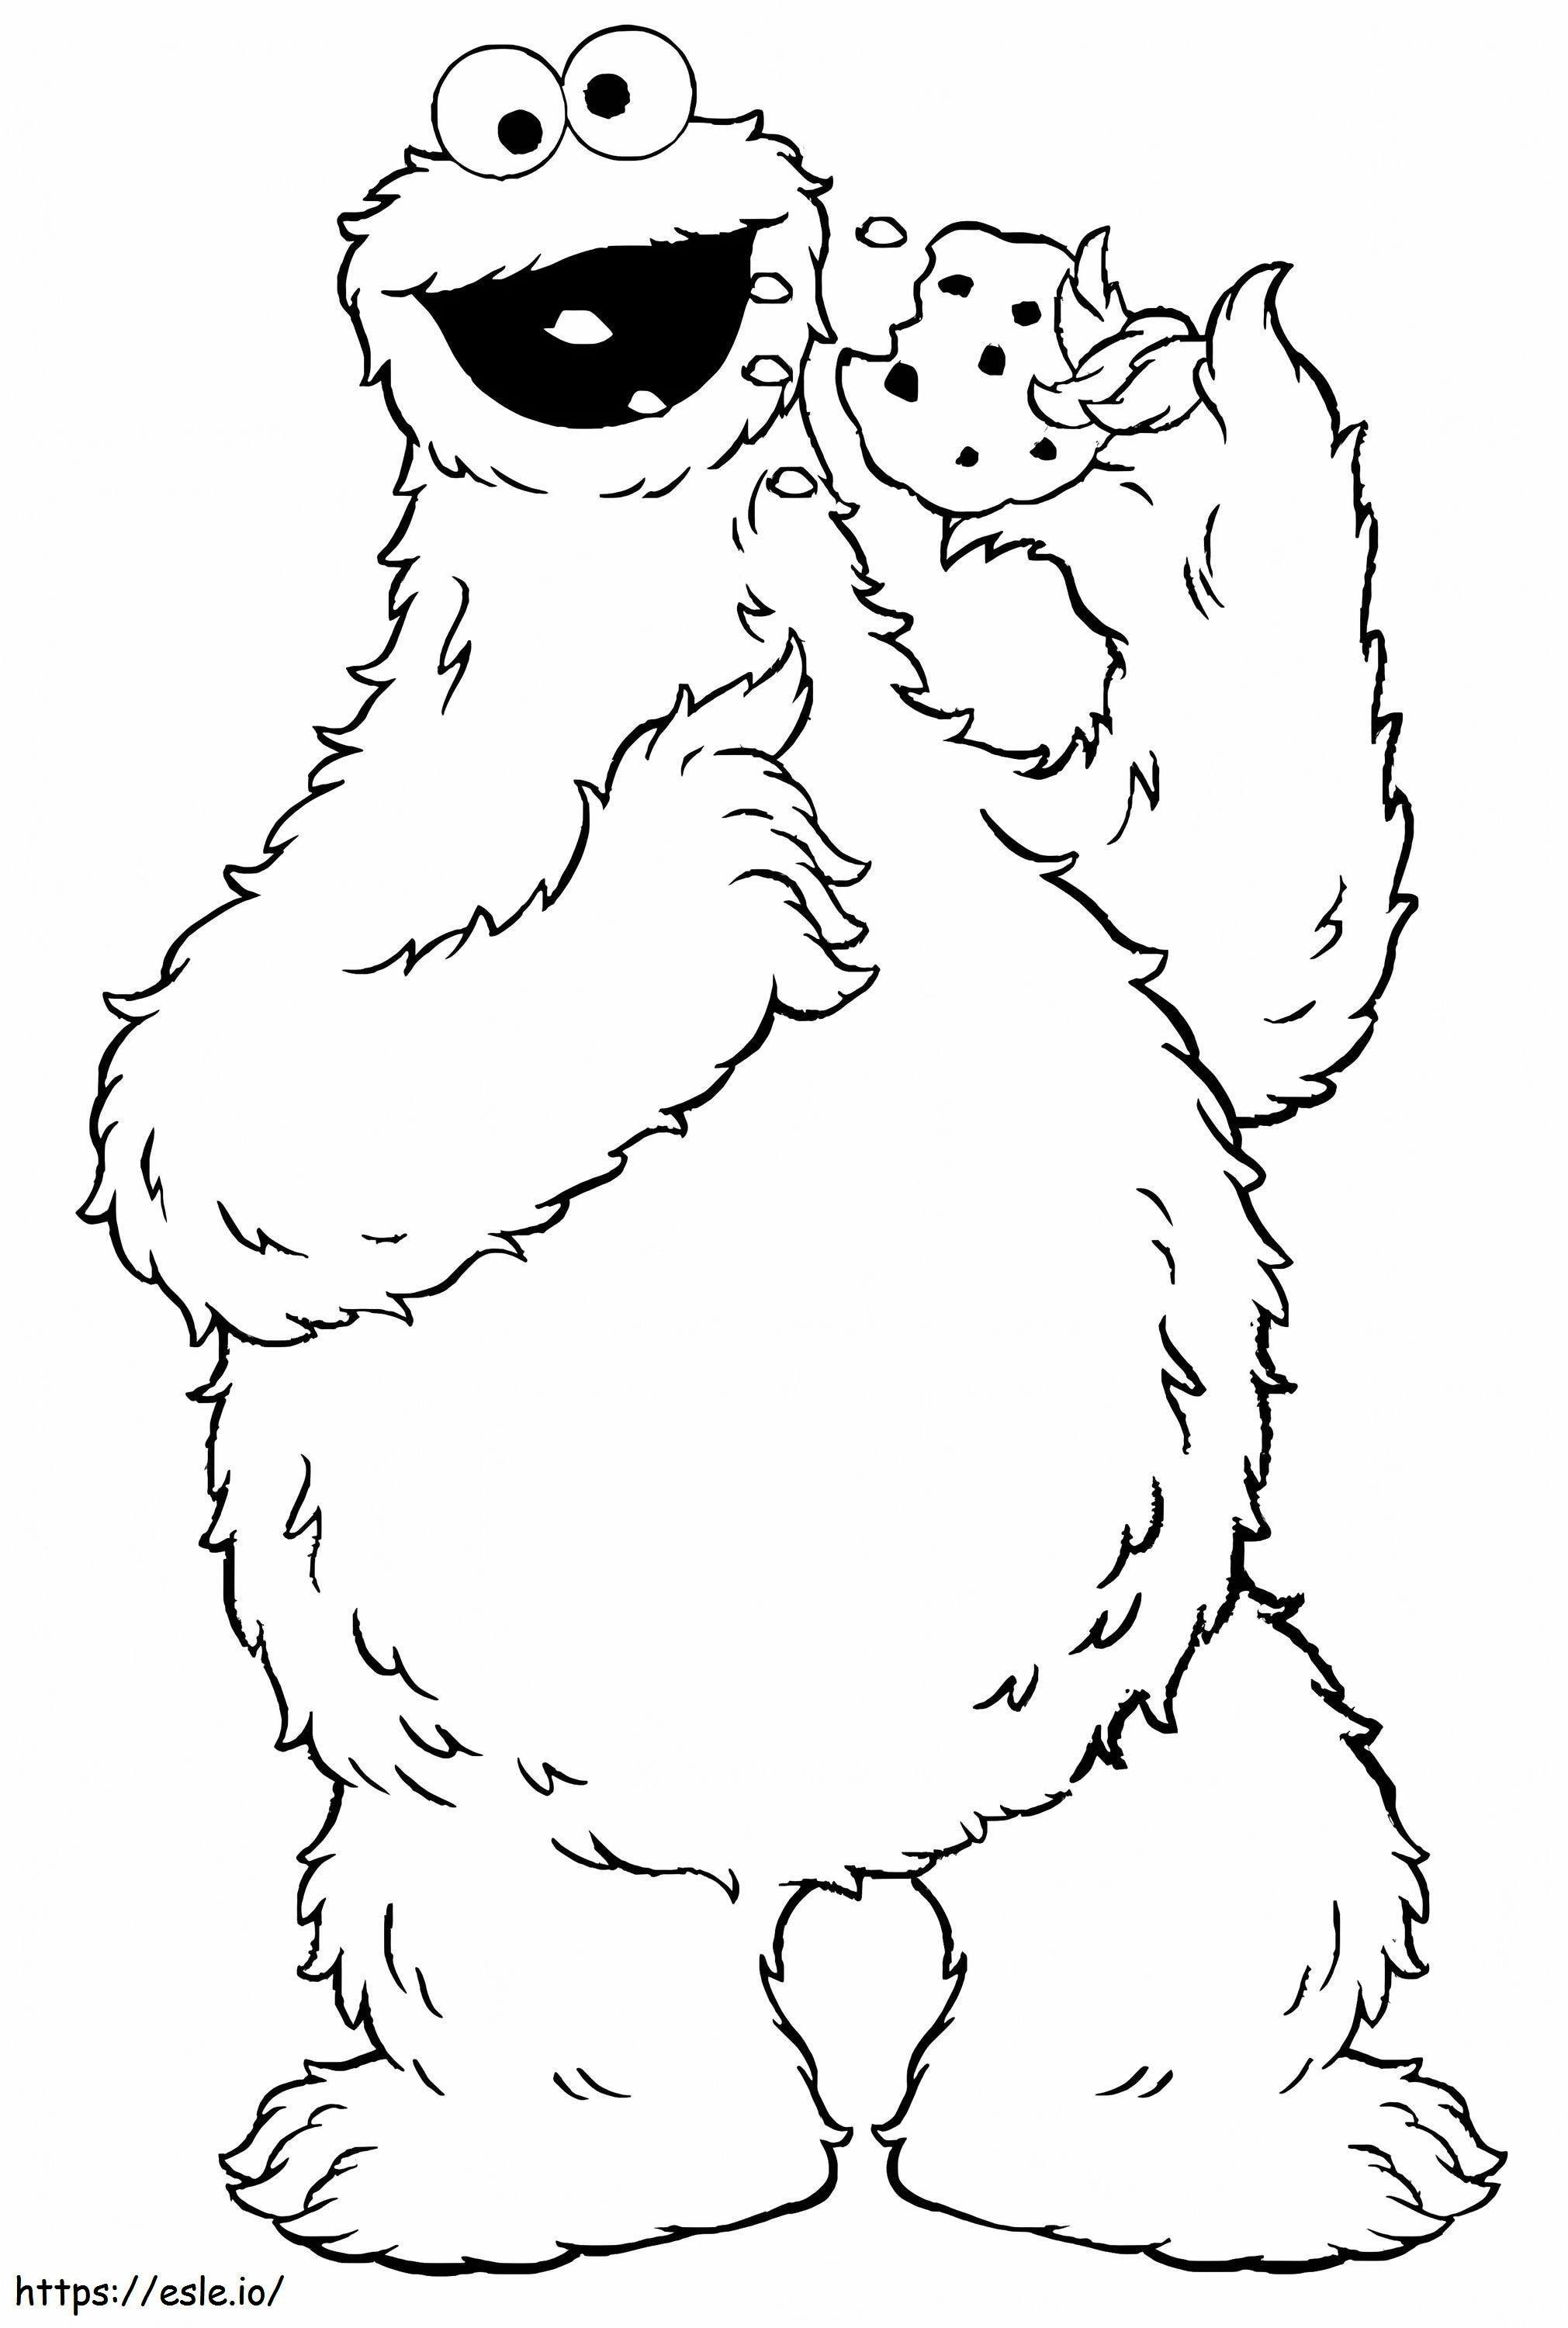 Elmo Eating Cookie coloring page